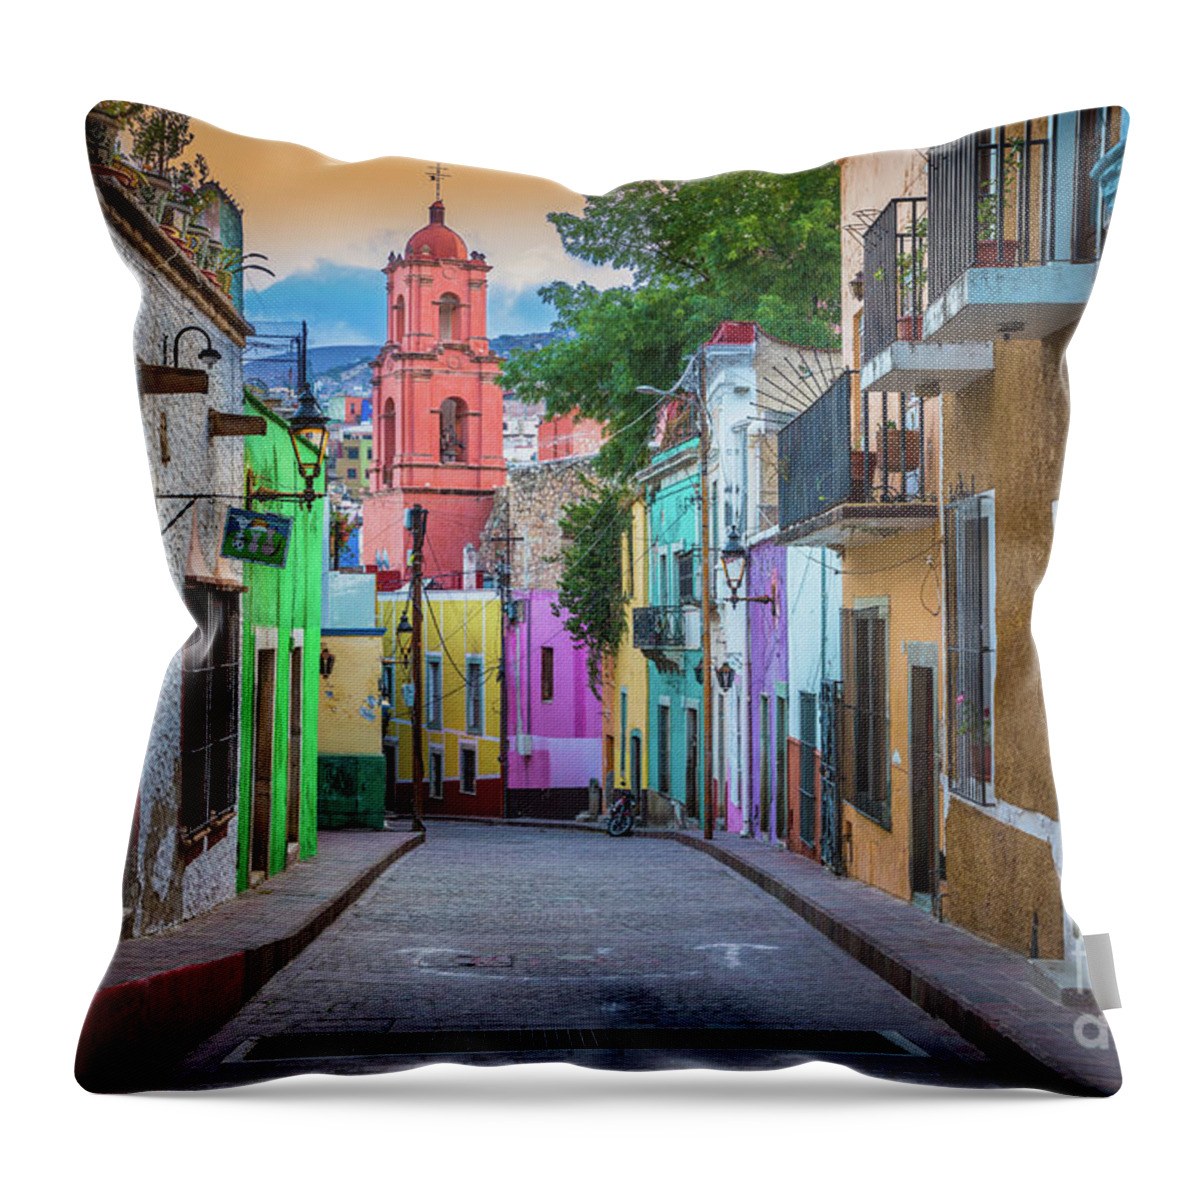 America Throw Pillow featuring the photograph Guanajuato Backstreet by Inge Johnsson